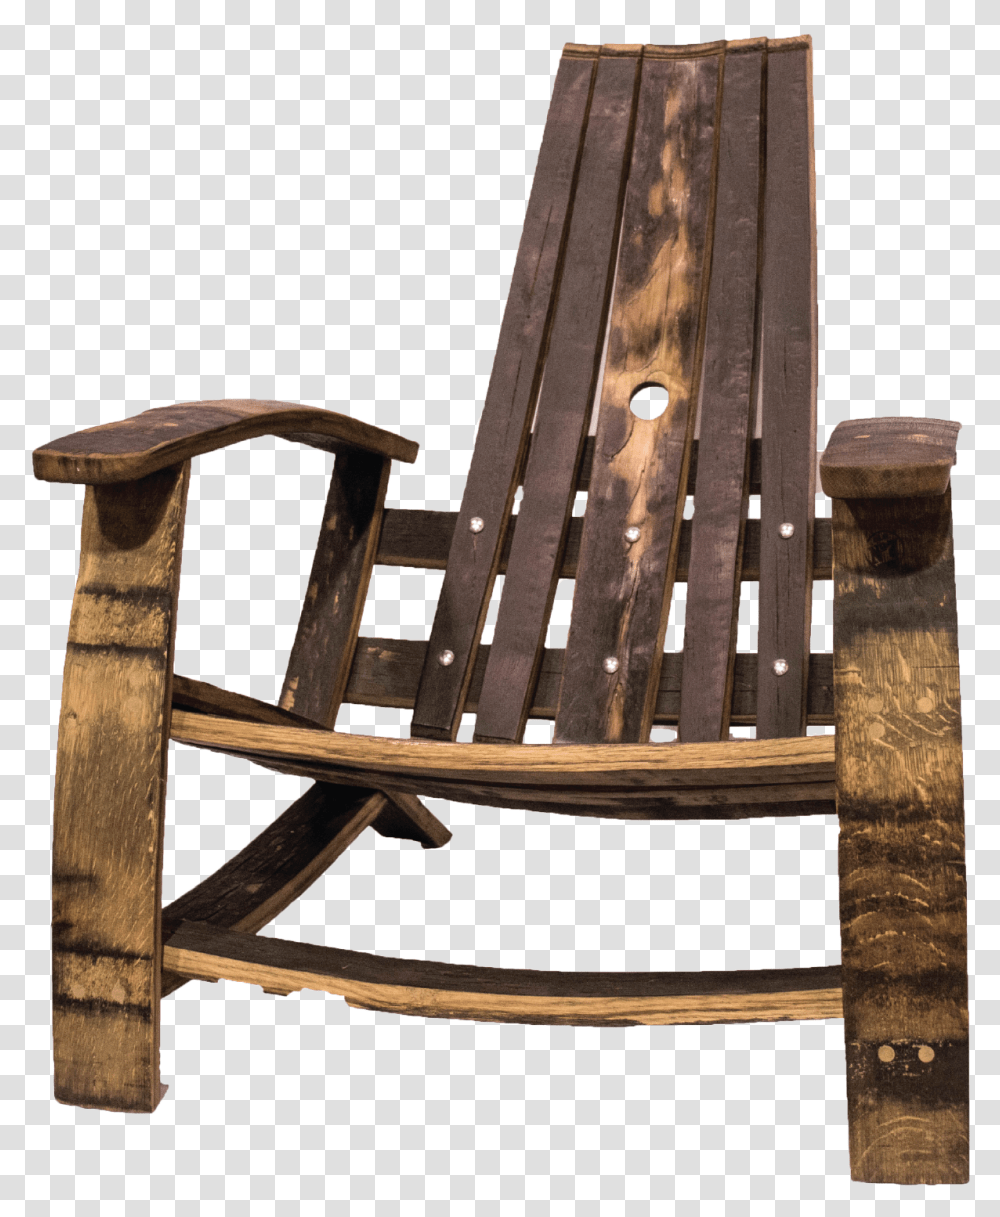 QuotClassquotlazyload Lazyload Mirage Cloudzoom Featured Chair, Furniture, Rocking Chair Transparent Png